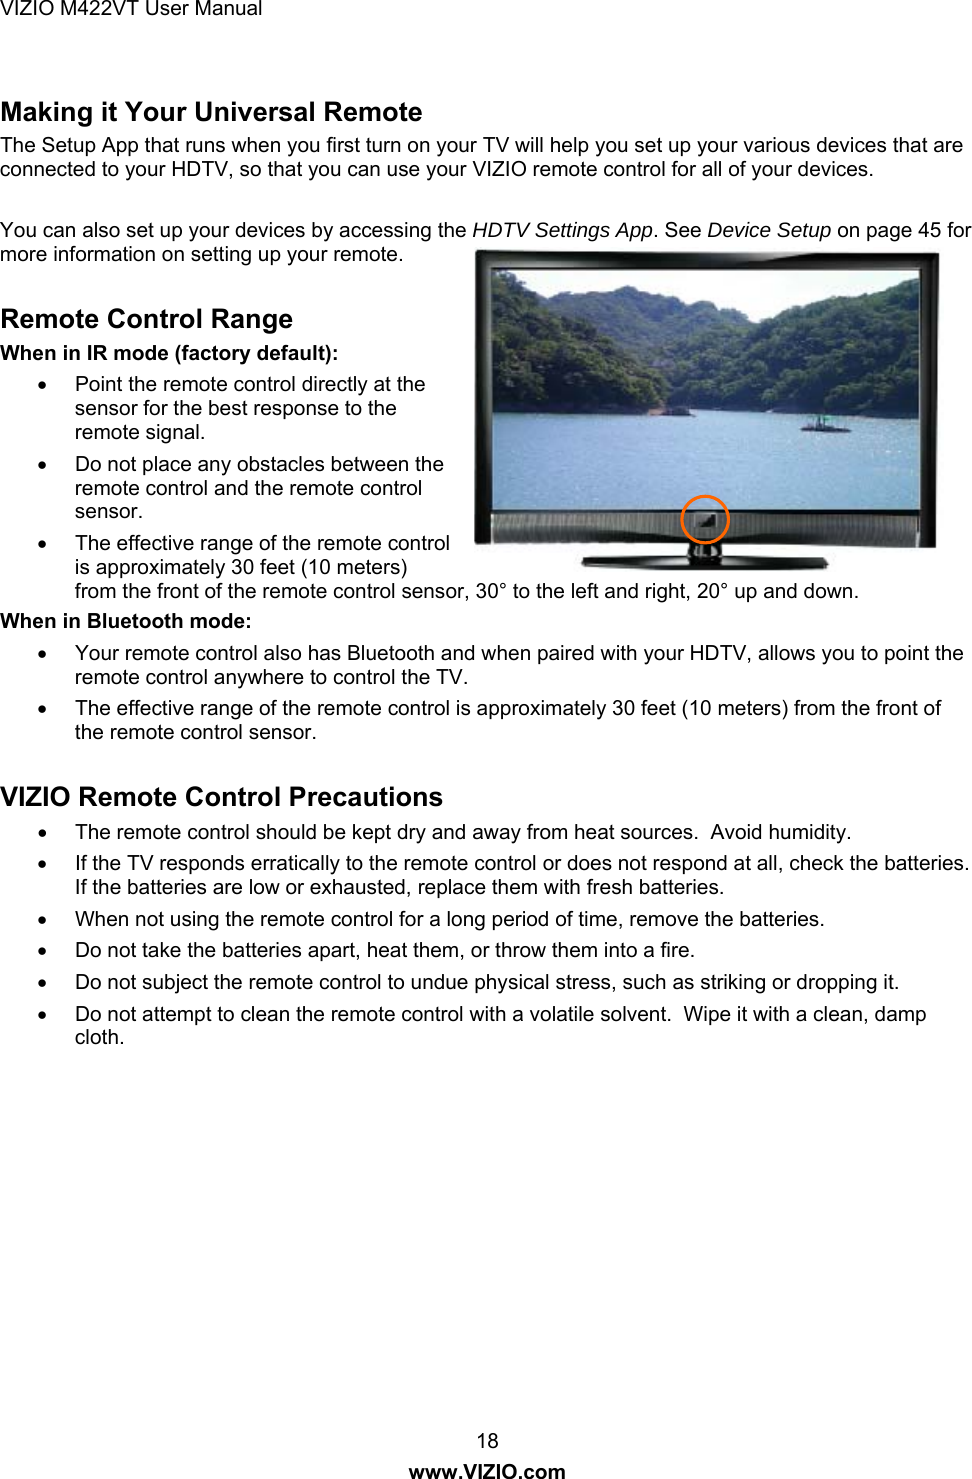 VIZIO M422VT User Manual 18 www.VIZIO.com  Making it Your Universal Remote The Setup App that runs when you first turn on your TV will help you set up your various devices that are connected to your HDTV, so that you can use your VIZIO remote control for all of your devices.  You can also set up your devices by accessing the HDTV Settings App. See Device Setup on page 45 for more information on setting up your remote.    Remote Control Range  When in IR mode (factory default): •  Point the remote control directly at the sensor for the best response to the remote signal. •  Do not place any obstacles between the remote control and the remote control sensor. •  The effective range of the remote control is approximately 30 feet (10 meters) from the front of the remote control sensor, 30° to the left and right, 20° up and down. When in Bluetooth mode: •  Your remote control also has Bluetooth and when paired with your HDTV, allows you to point the remote control anywhere to control the TV. •  The effective range of the remote control is approximately 30 feet (10 meters) from the front of the remote control sensor.  VIZIO Remote Control Precautions •  The remote control should be kept dry and away from heat sources.  Avoid humidity. •  If the TV responds erratically to the remote control or does not respond at all, check the batteries.  If the batteries are low or exhausted, replace them with fresh batteries. •  When not using the remote control for a long period of time, remove the batteries. •  Do not take the batteries apart, heat them, or throw them into a fire. •  Do not subject the remote control to undue physical stress, such as striking or dropping it. •  Do not attempt to clean the remote control with a volatile solvent.  Wipe it with a clean, damp cloth. 